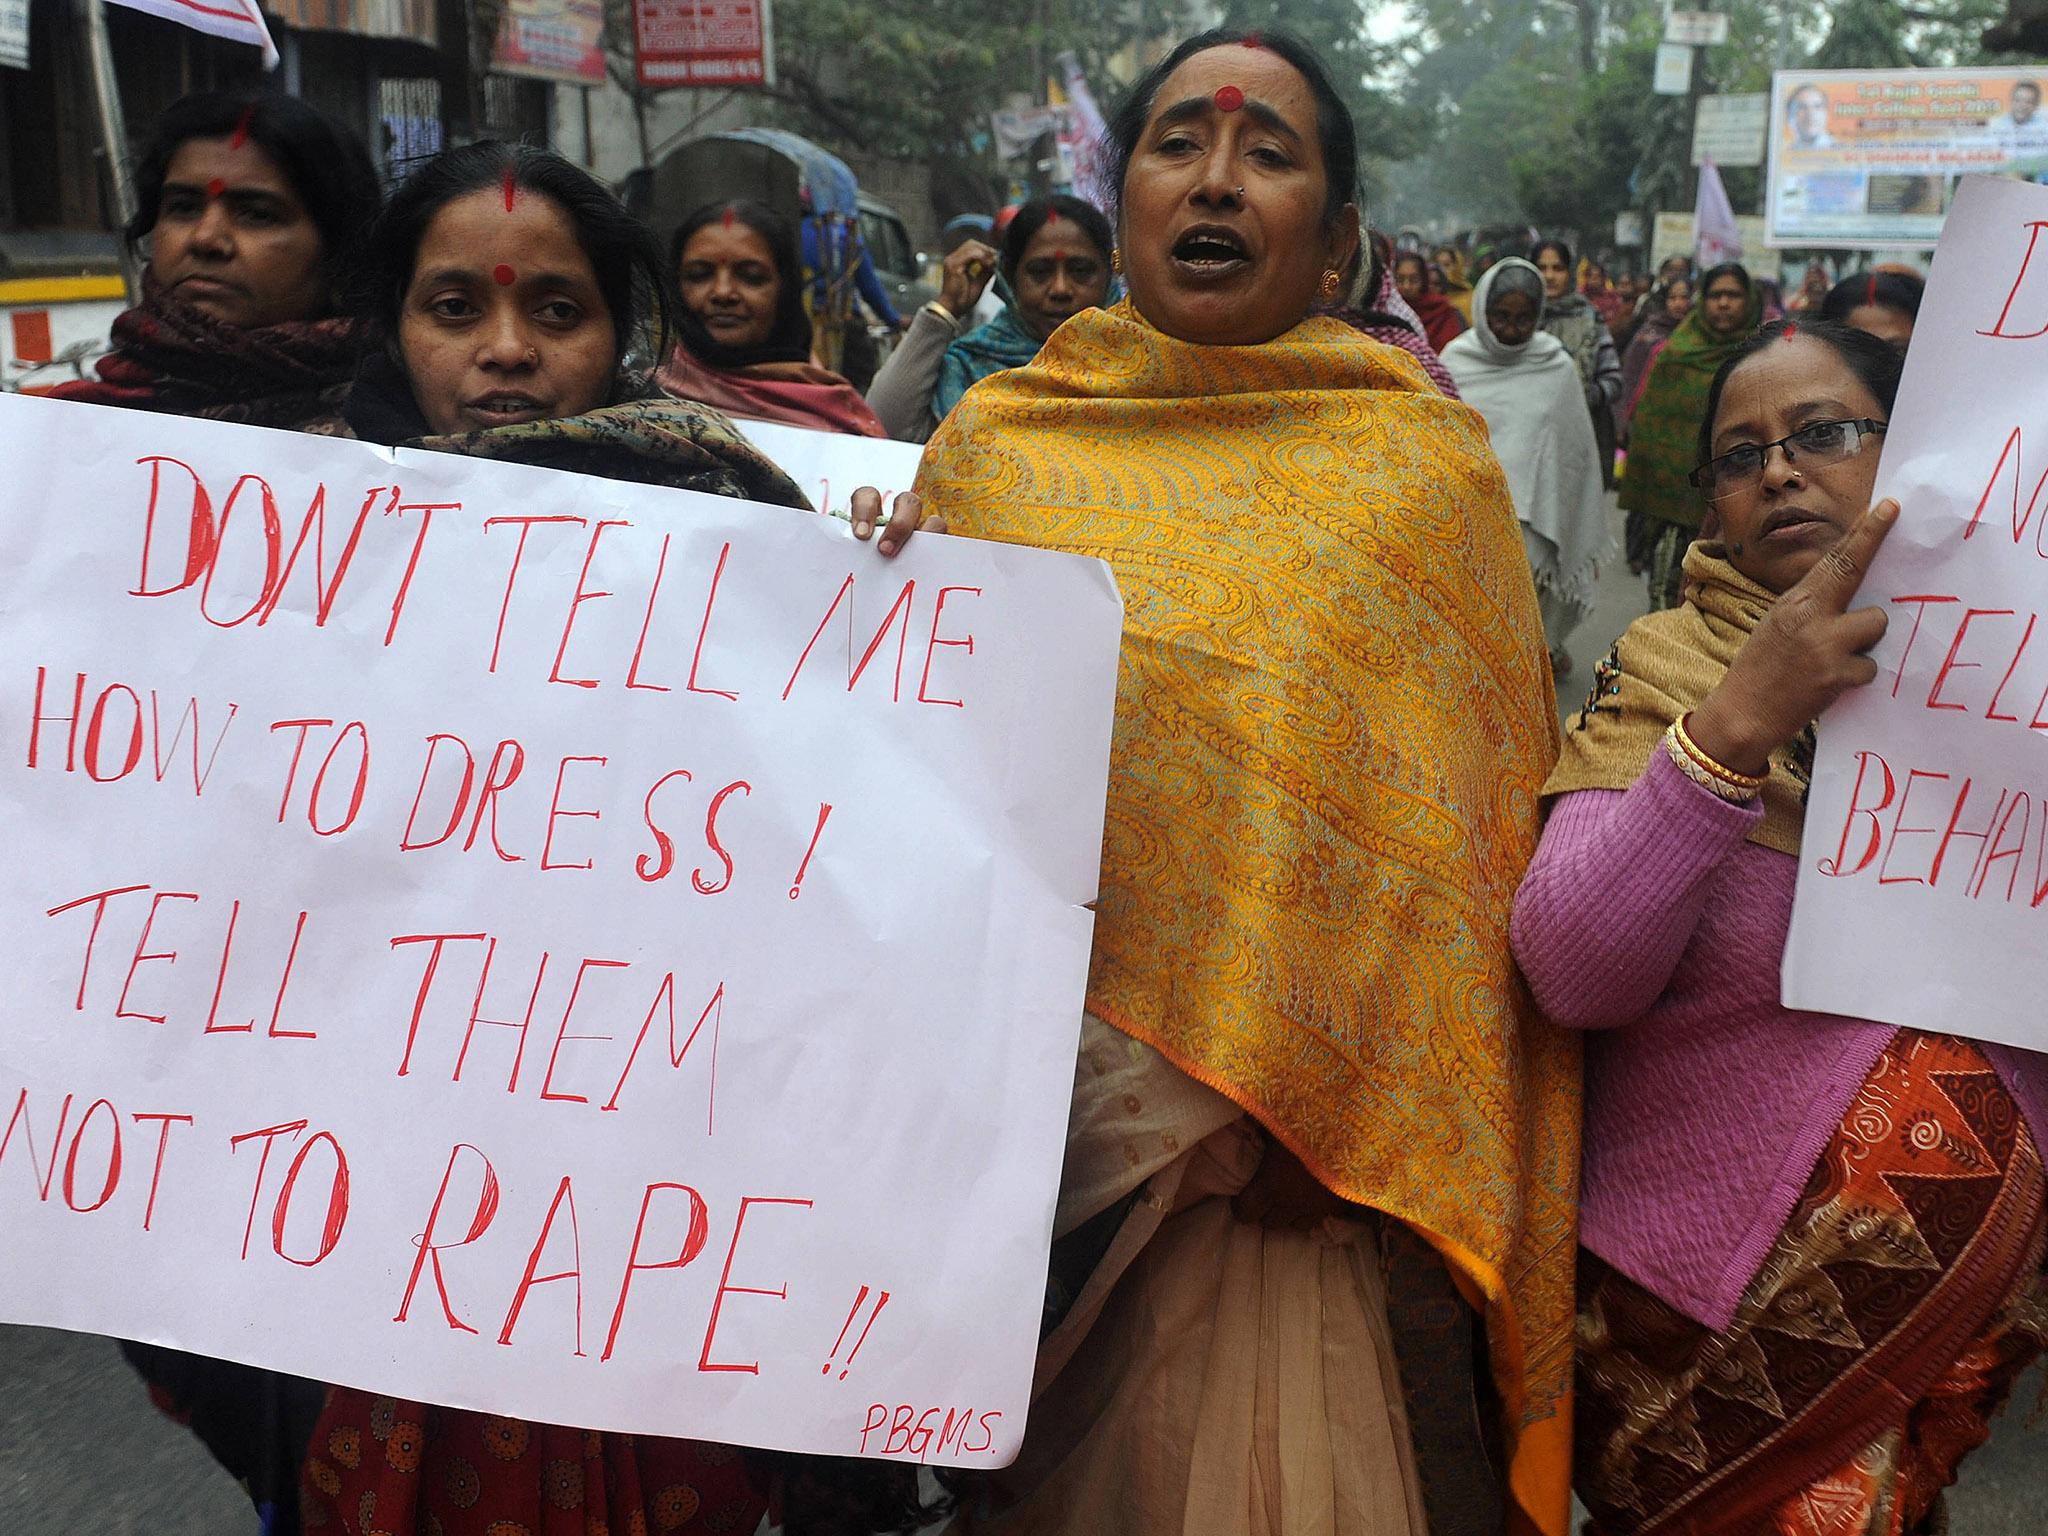 Representative image. Indian women activists hold placards during a protest against the gang rape and murder of a student in the Indian capital New Delhi